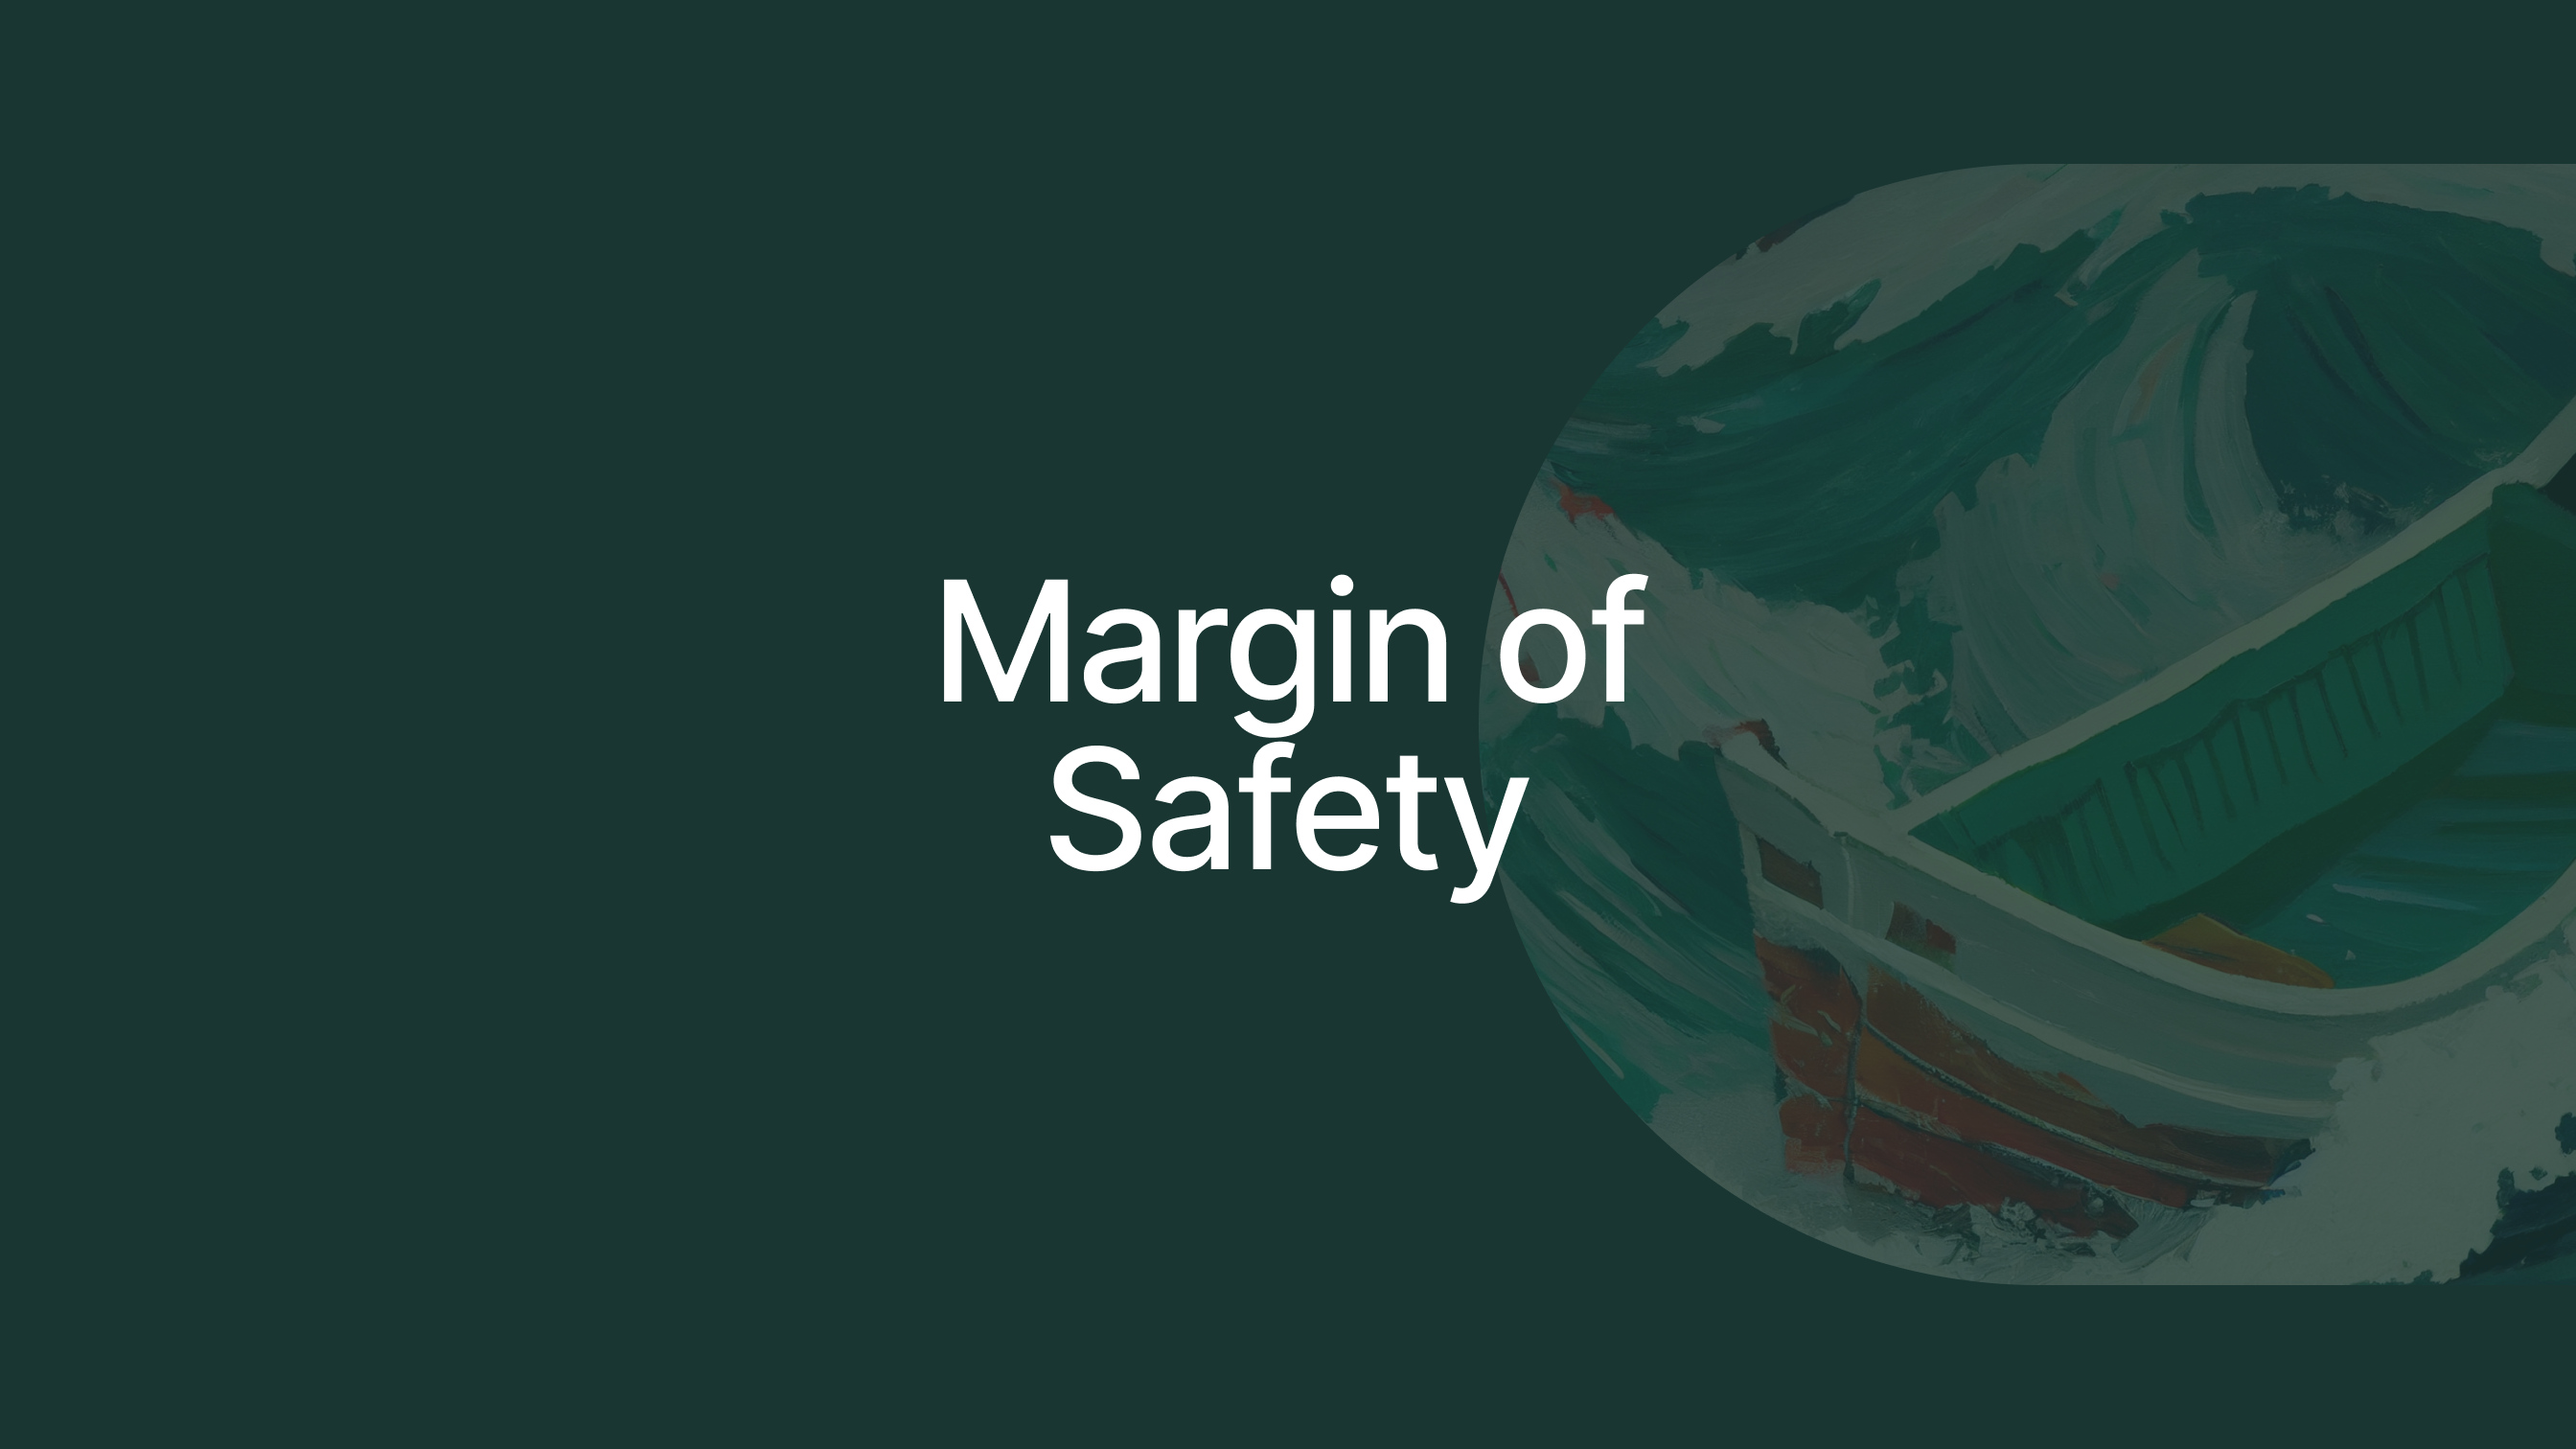 Margin of Safety - A term coined by Benjamin Graham